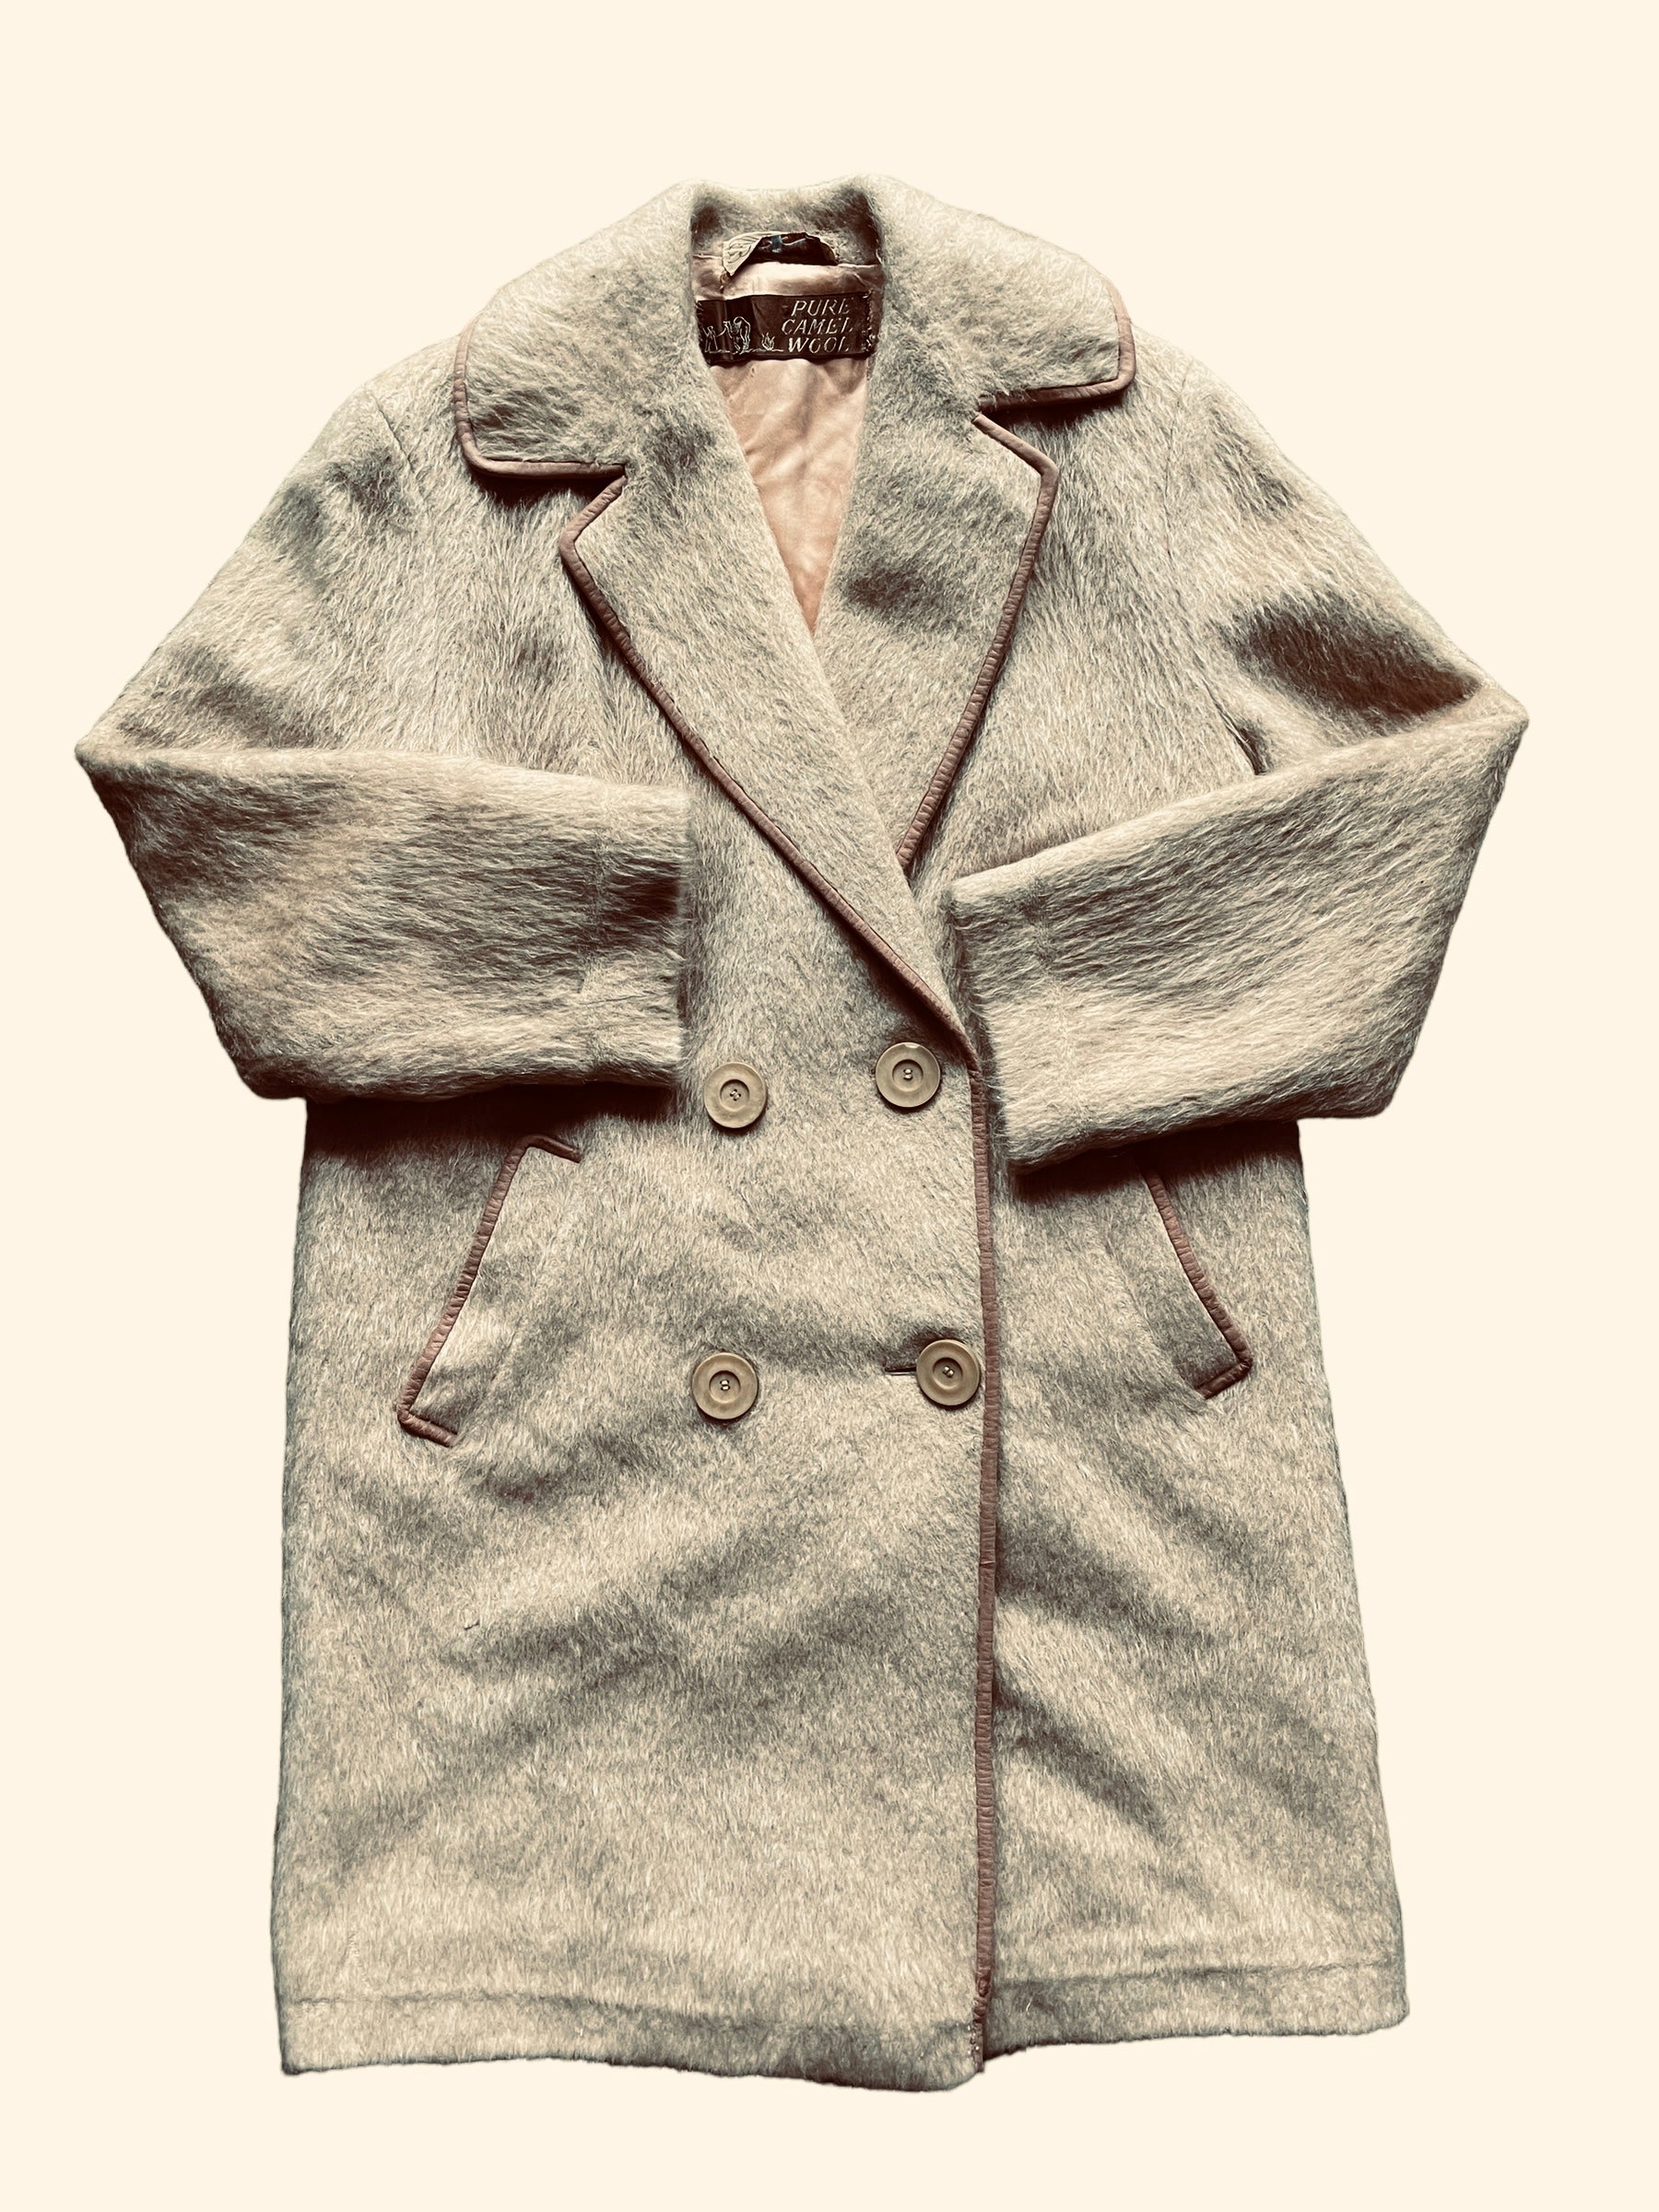 Full front flat lay view of Vintage 1940s J.H.S Camel Wool Mohair Coat | Seattle True Vintage | Barn Owl Vintage Coats